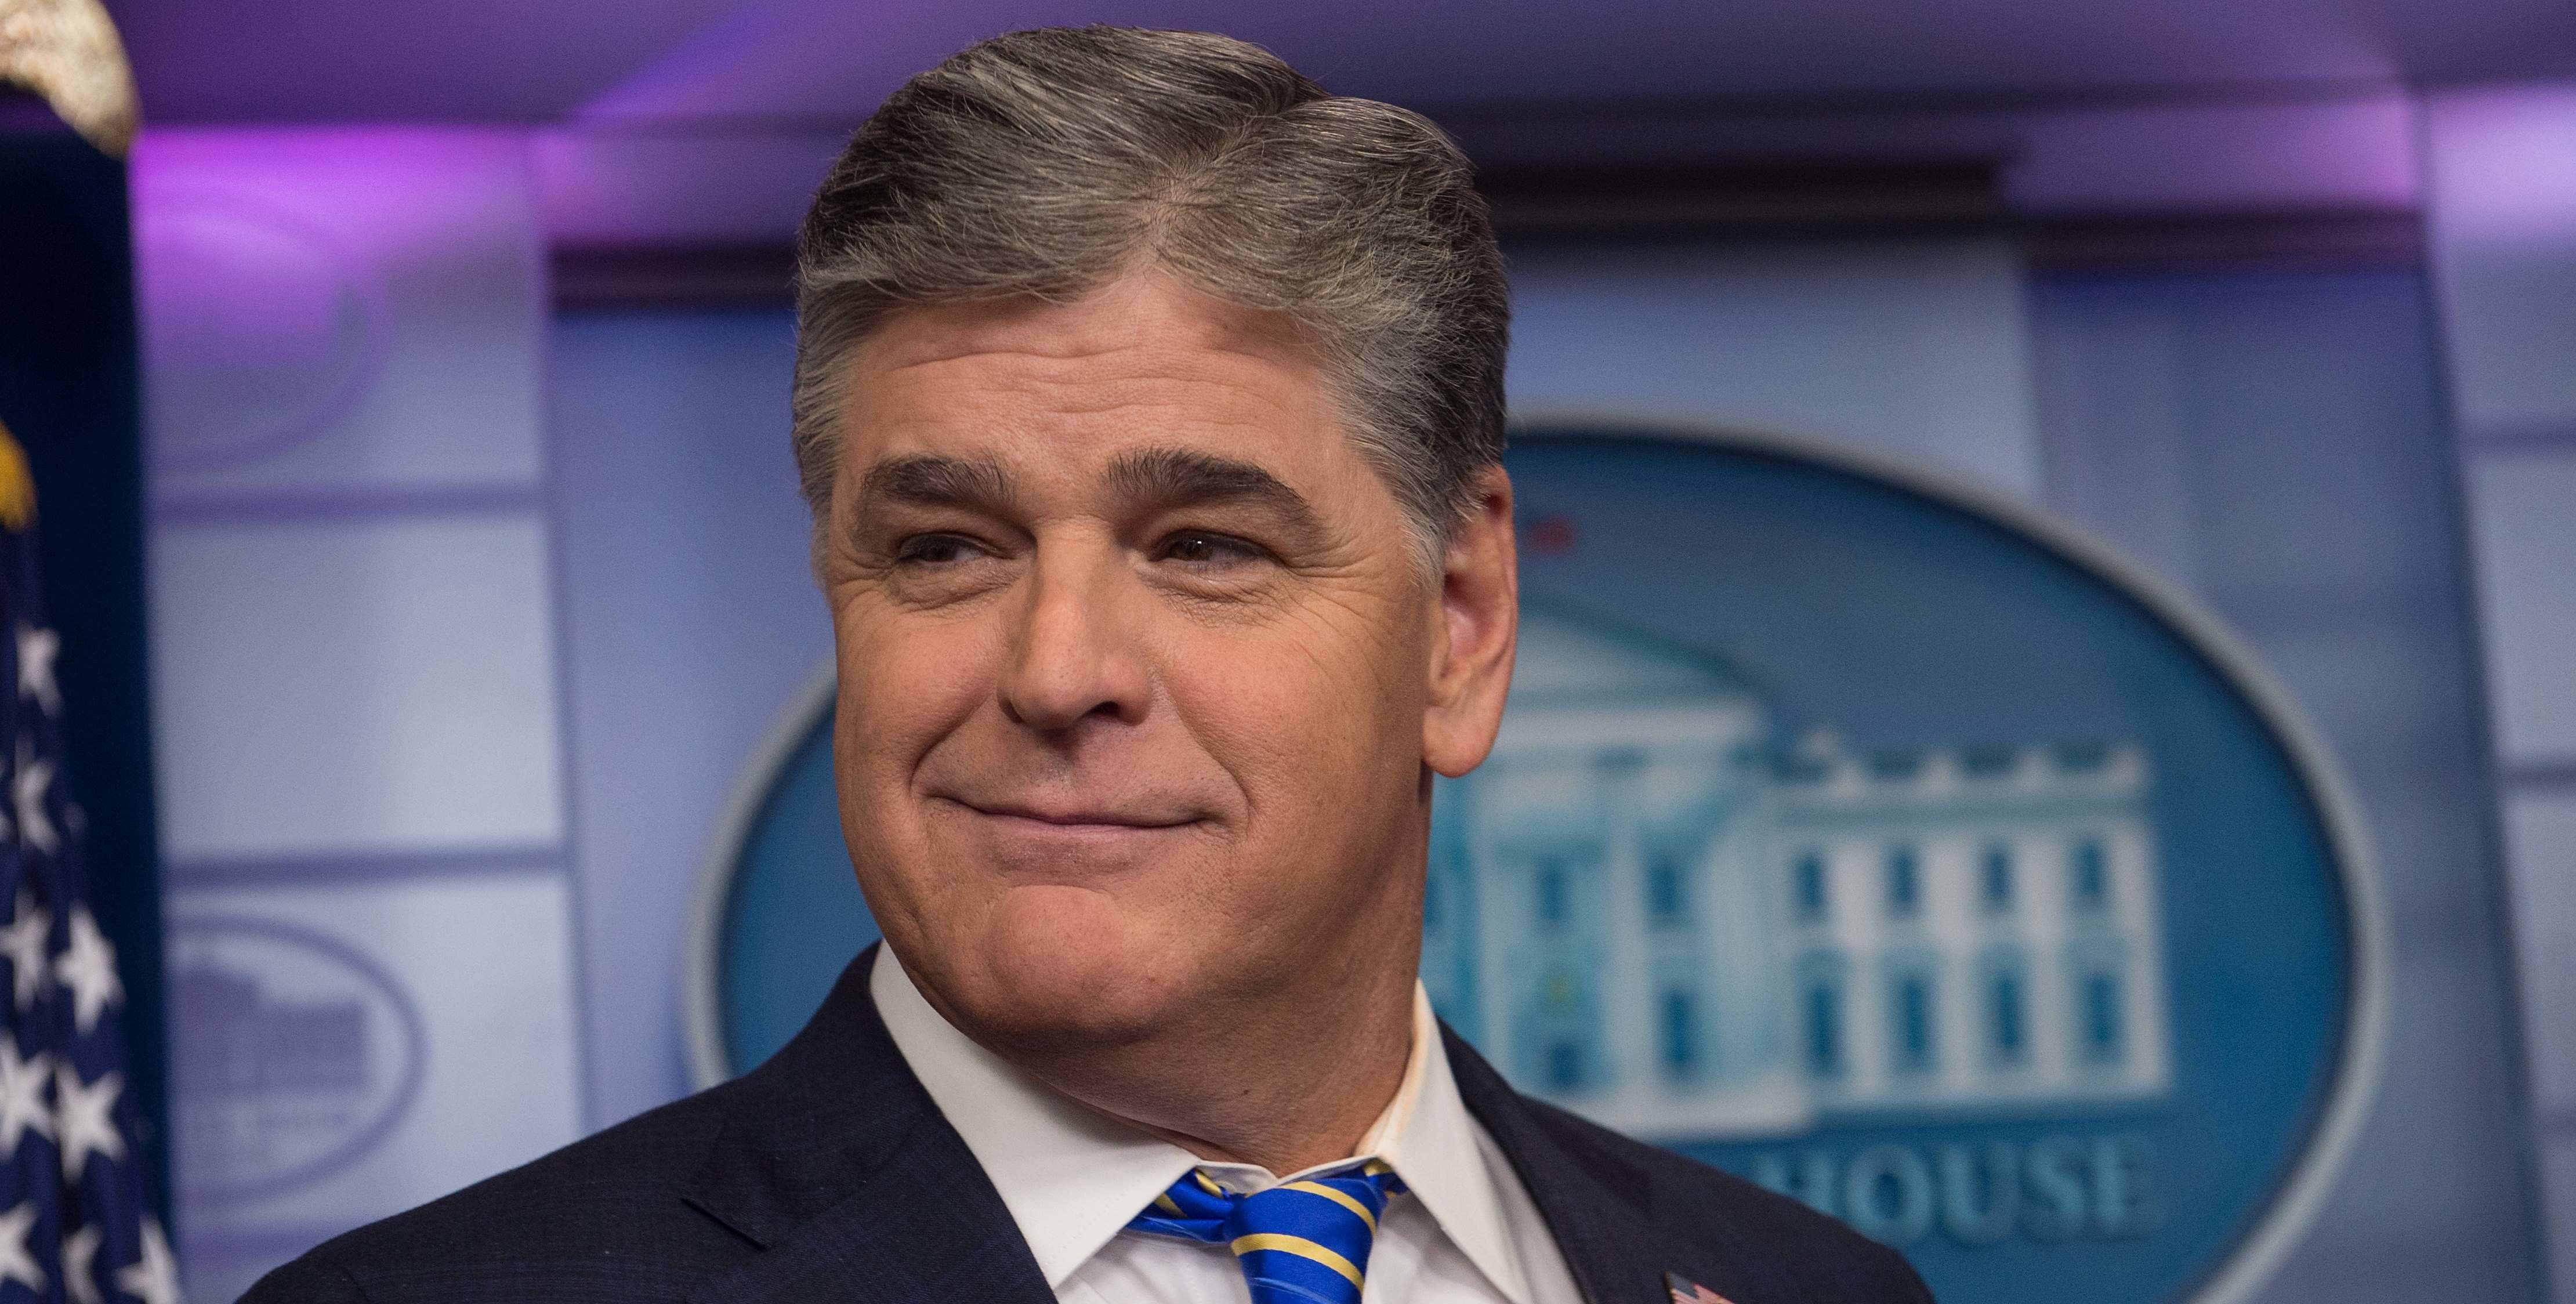 Fox News host Sean Hannity is probably wishing he hadn't asked&nbsp;Twitter "who is bankrolling the protests" against Trump.